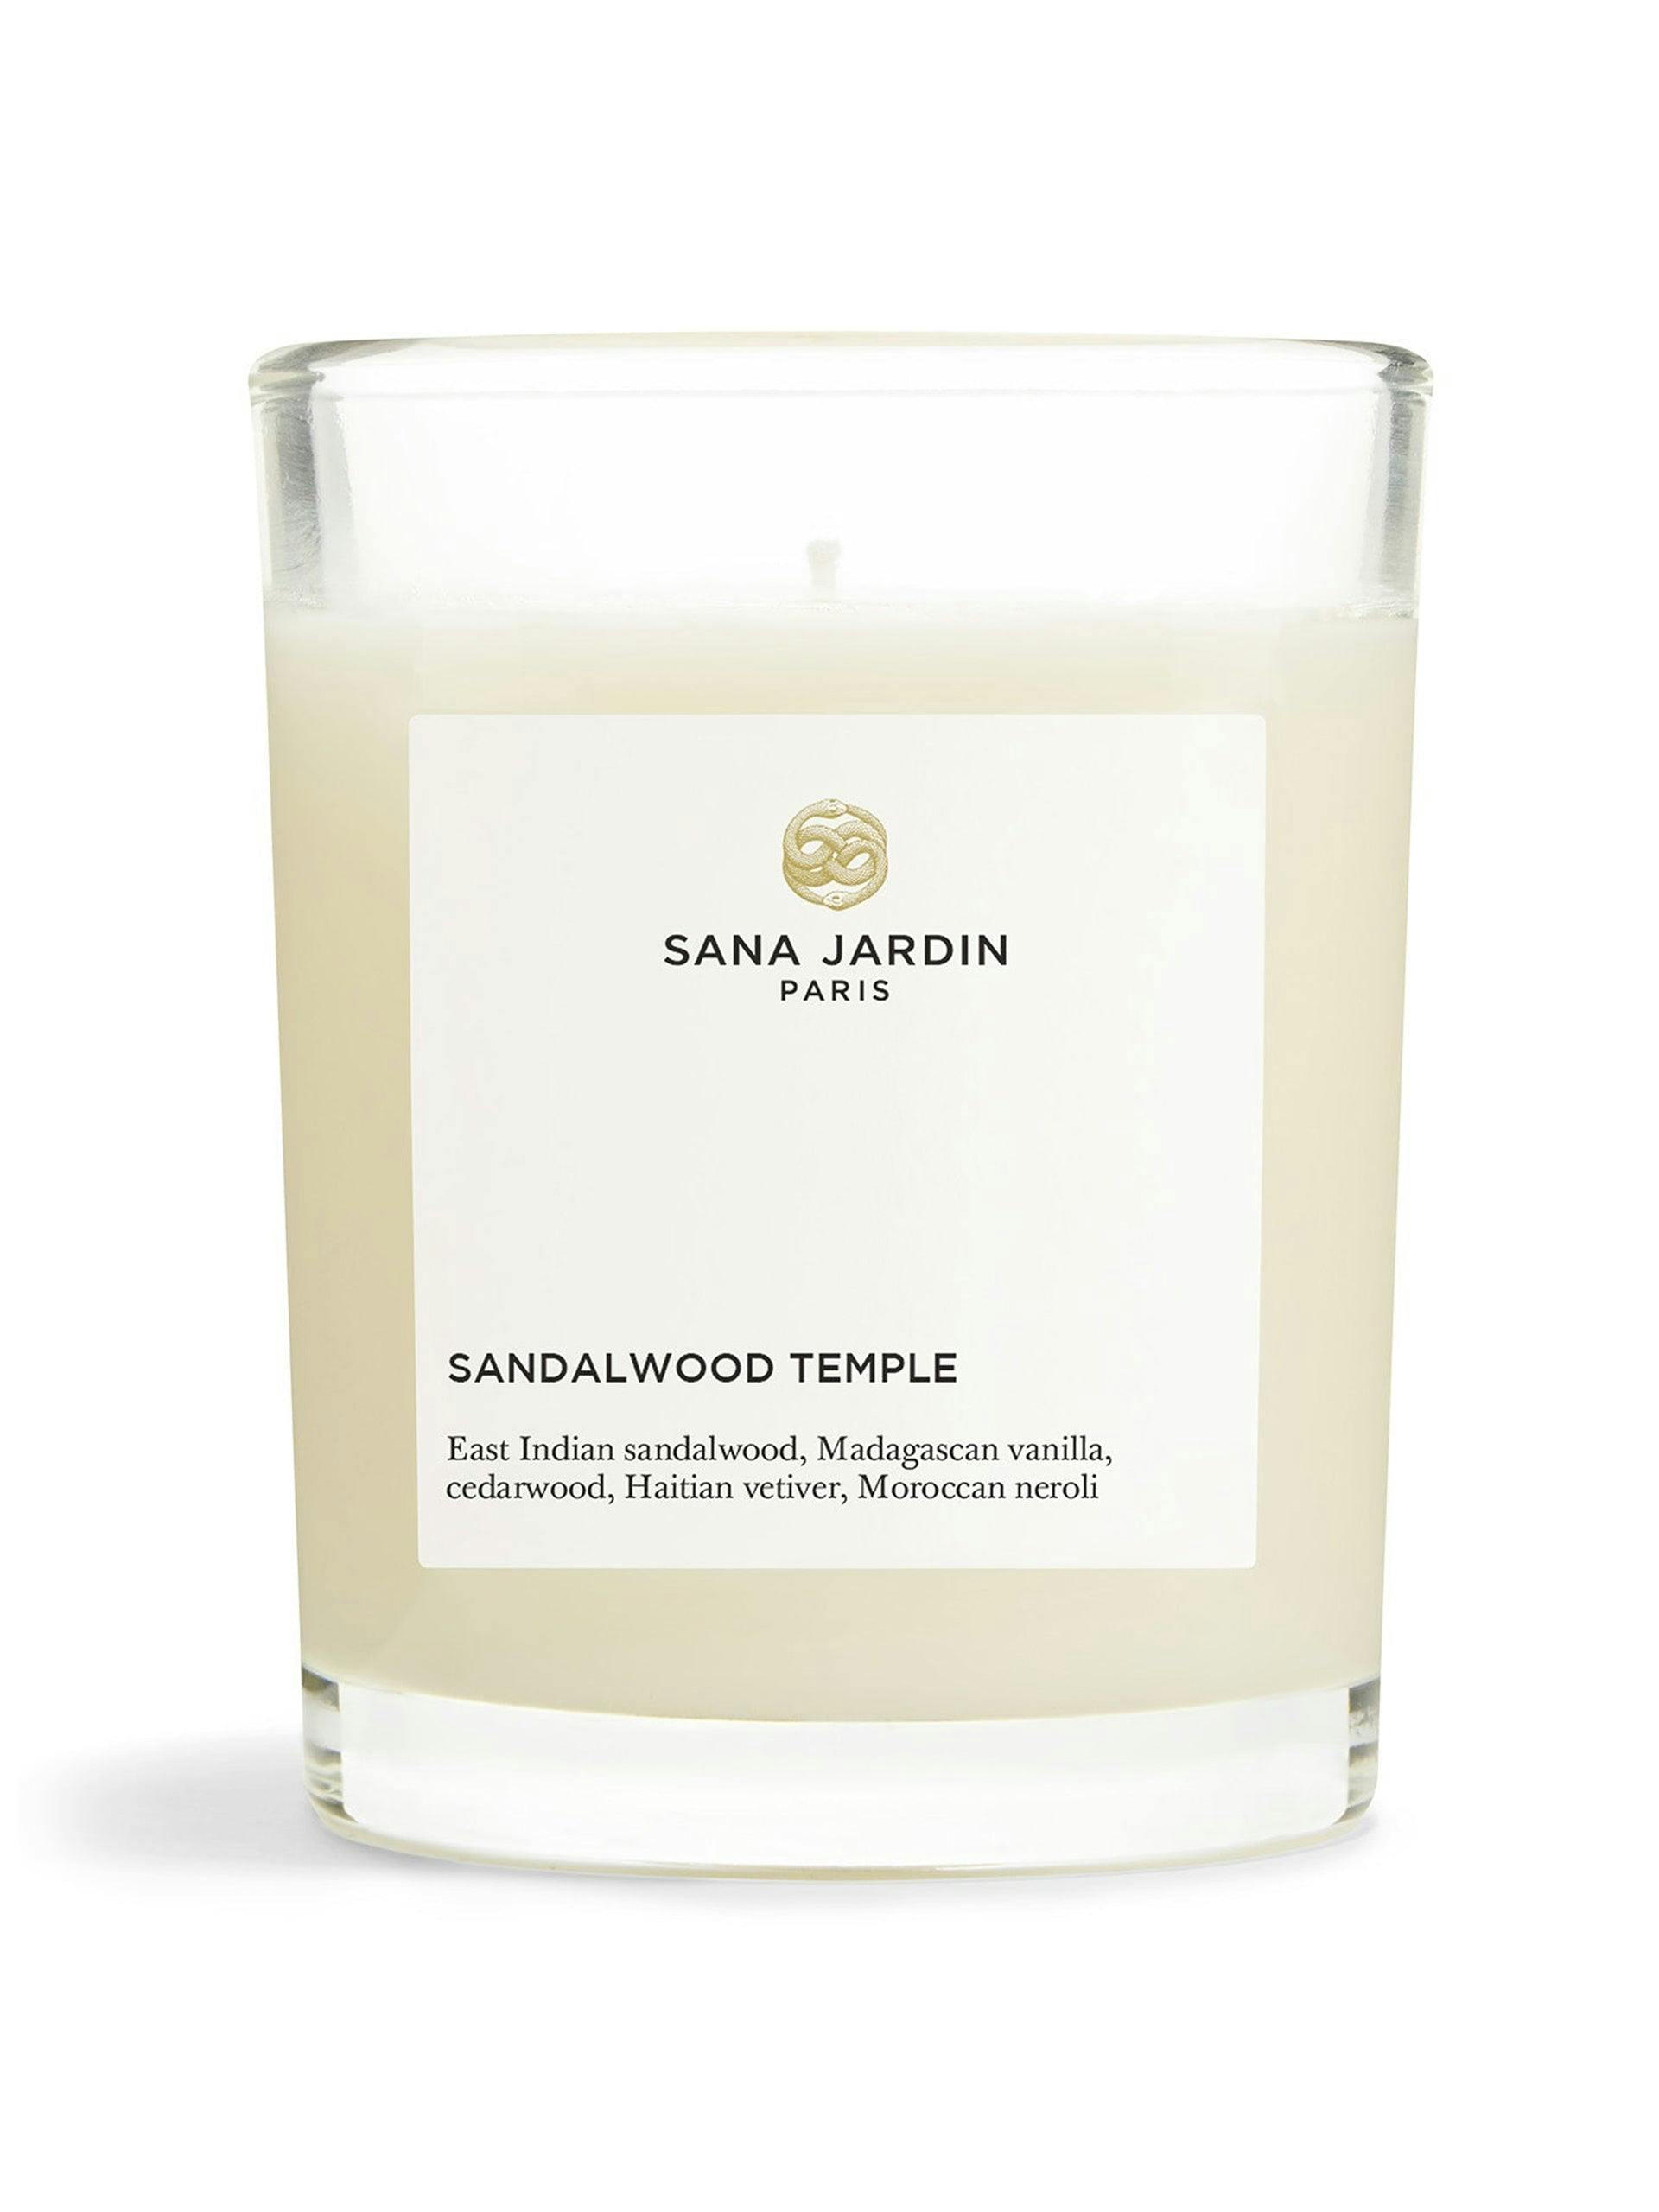 Sandalwood Temple scented candle